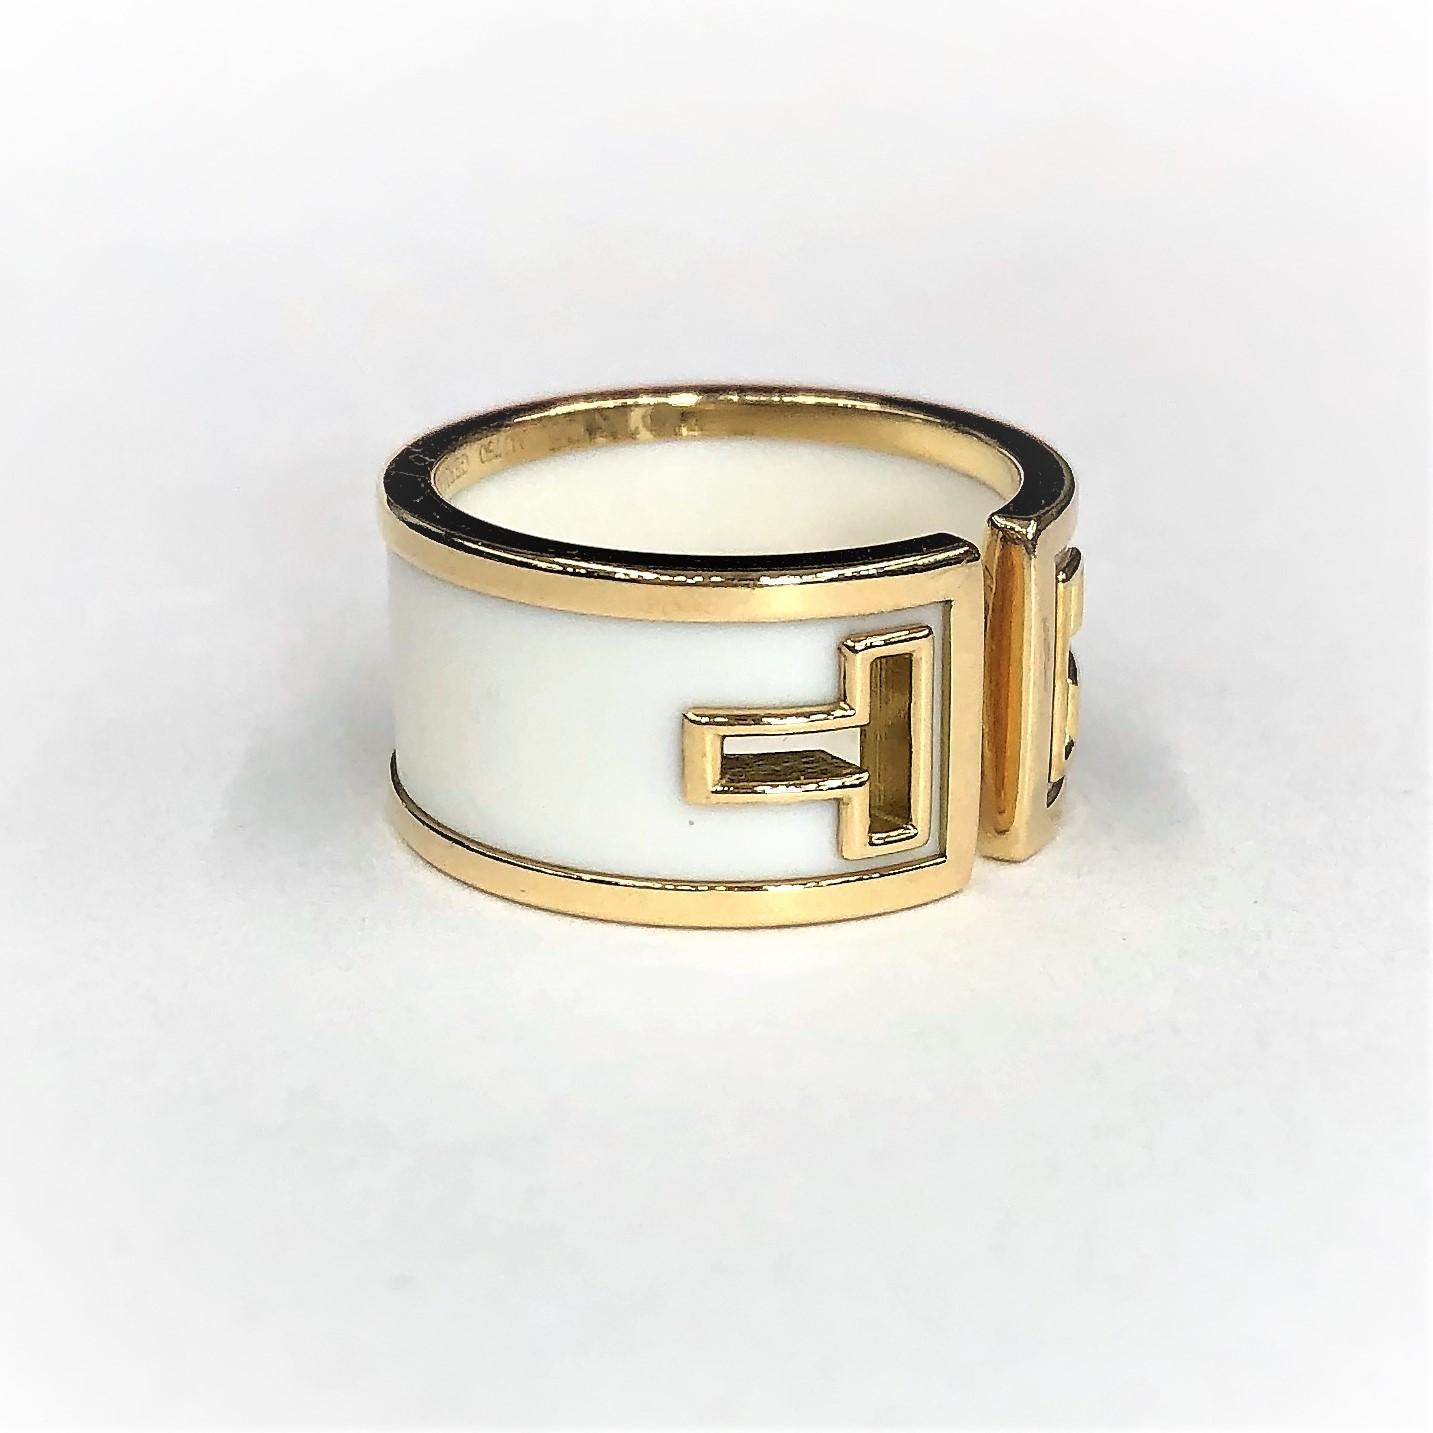 A ladies ring comprised of an 18K yellow gold frame with a white ceramic insert, and featuring gold rimmed 